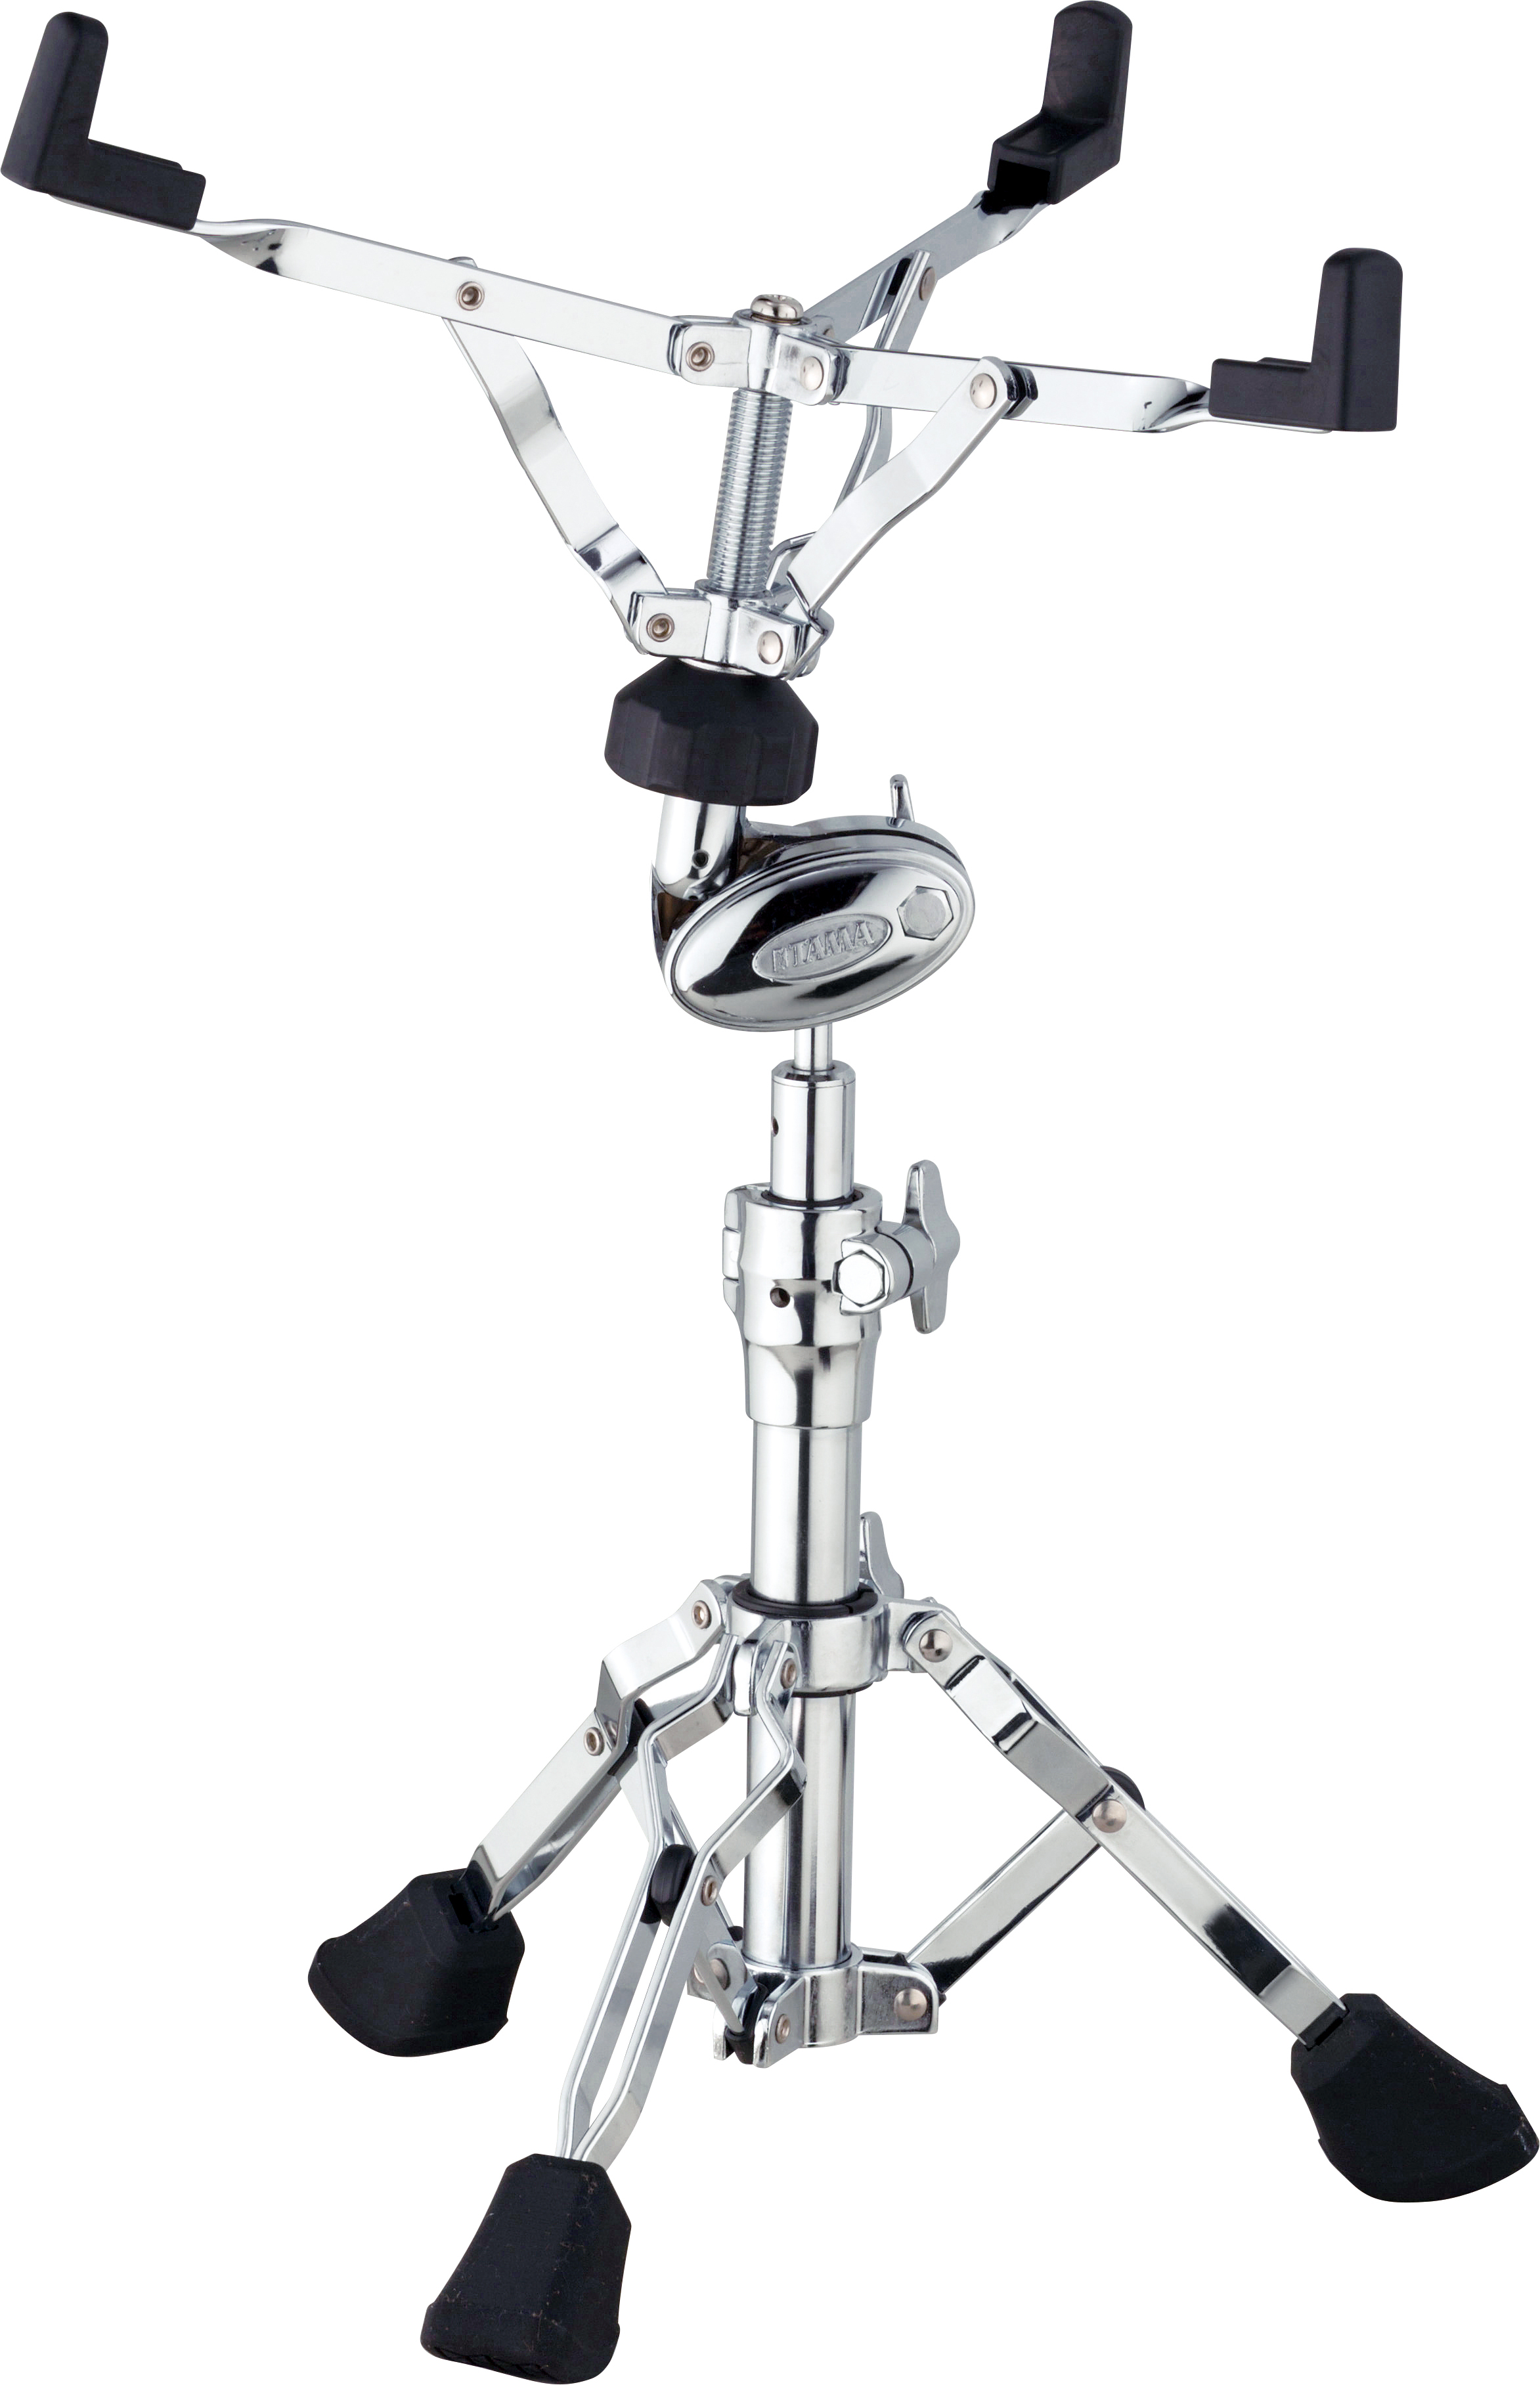 Tama Hs800w Tam Snare Stand - Pied De Caisse Claire - Main picture